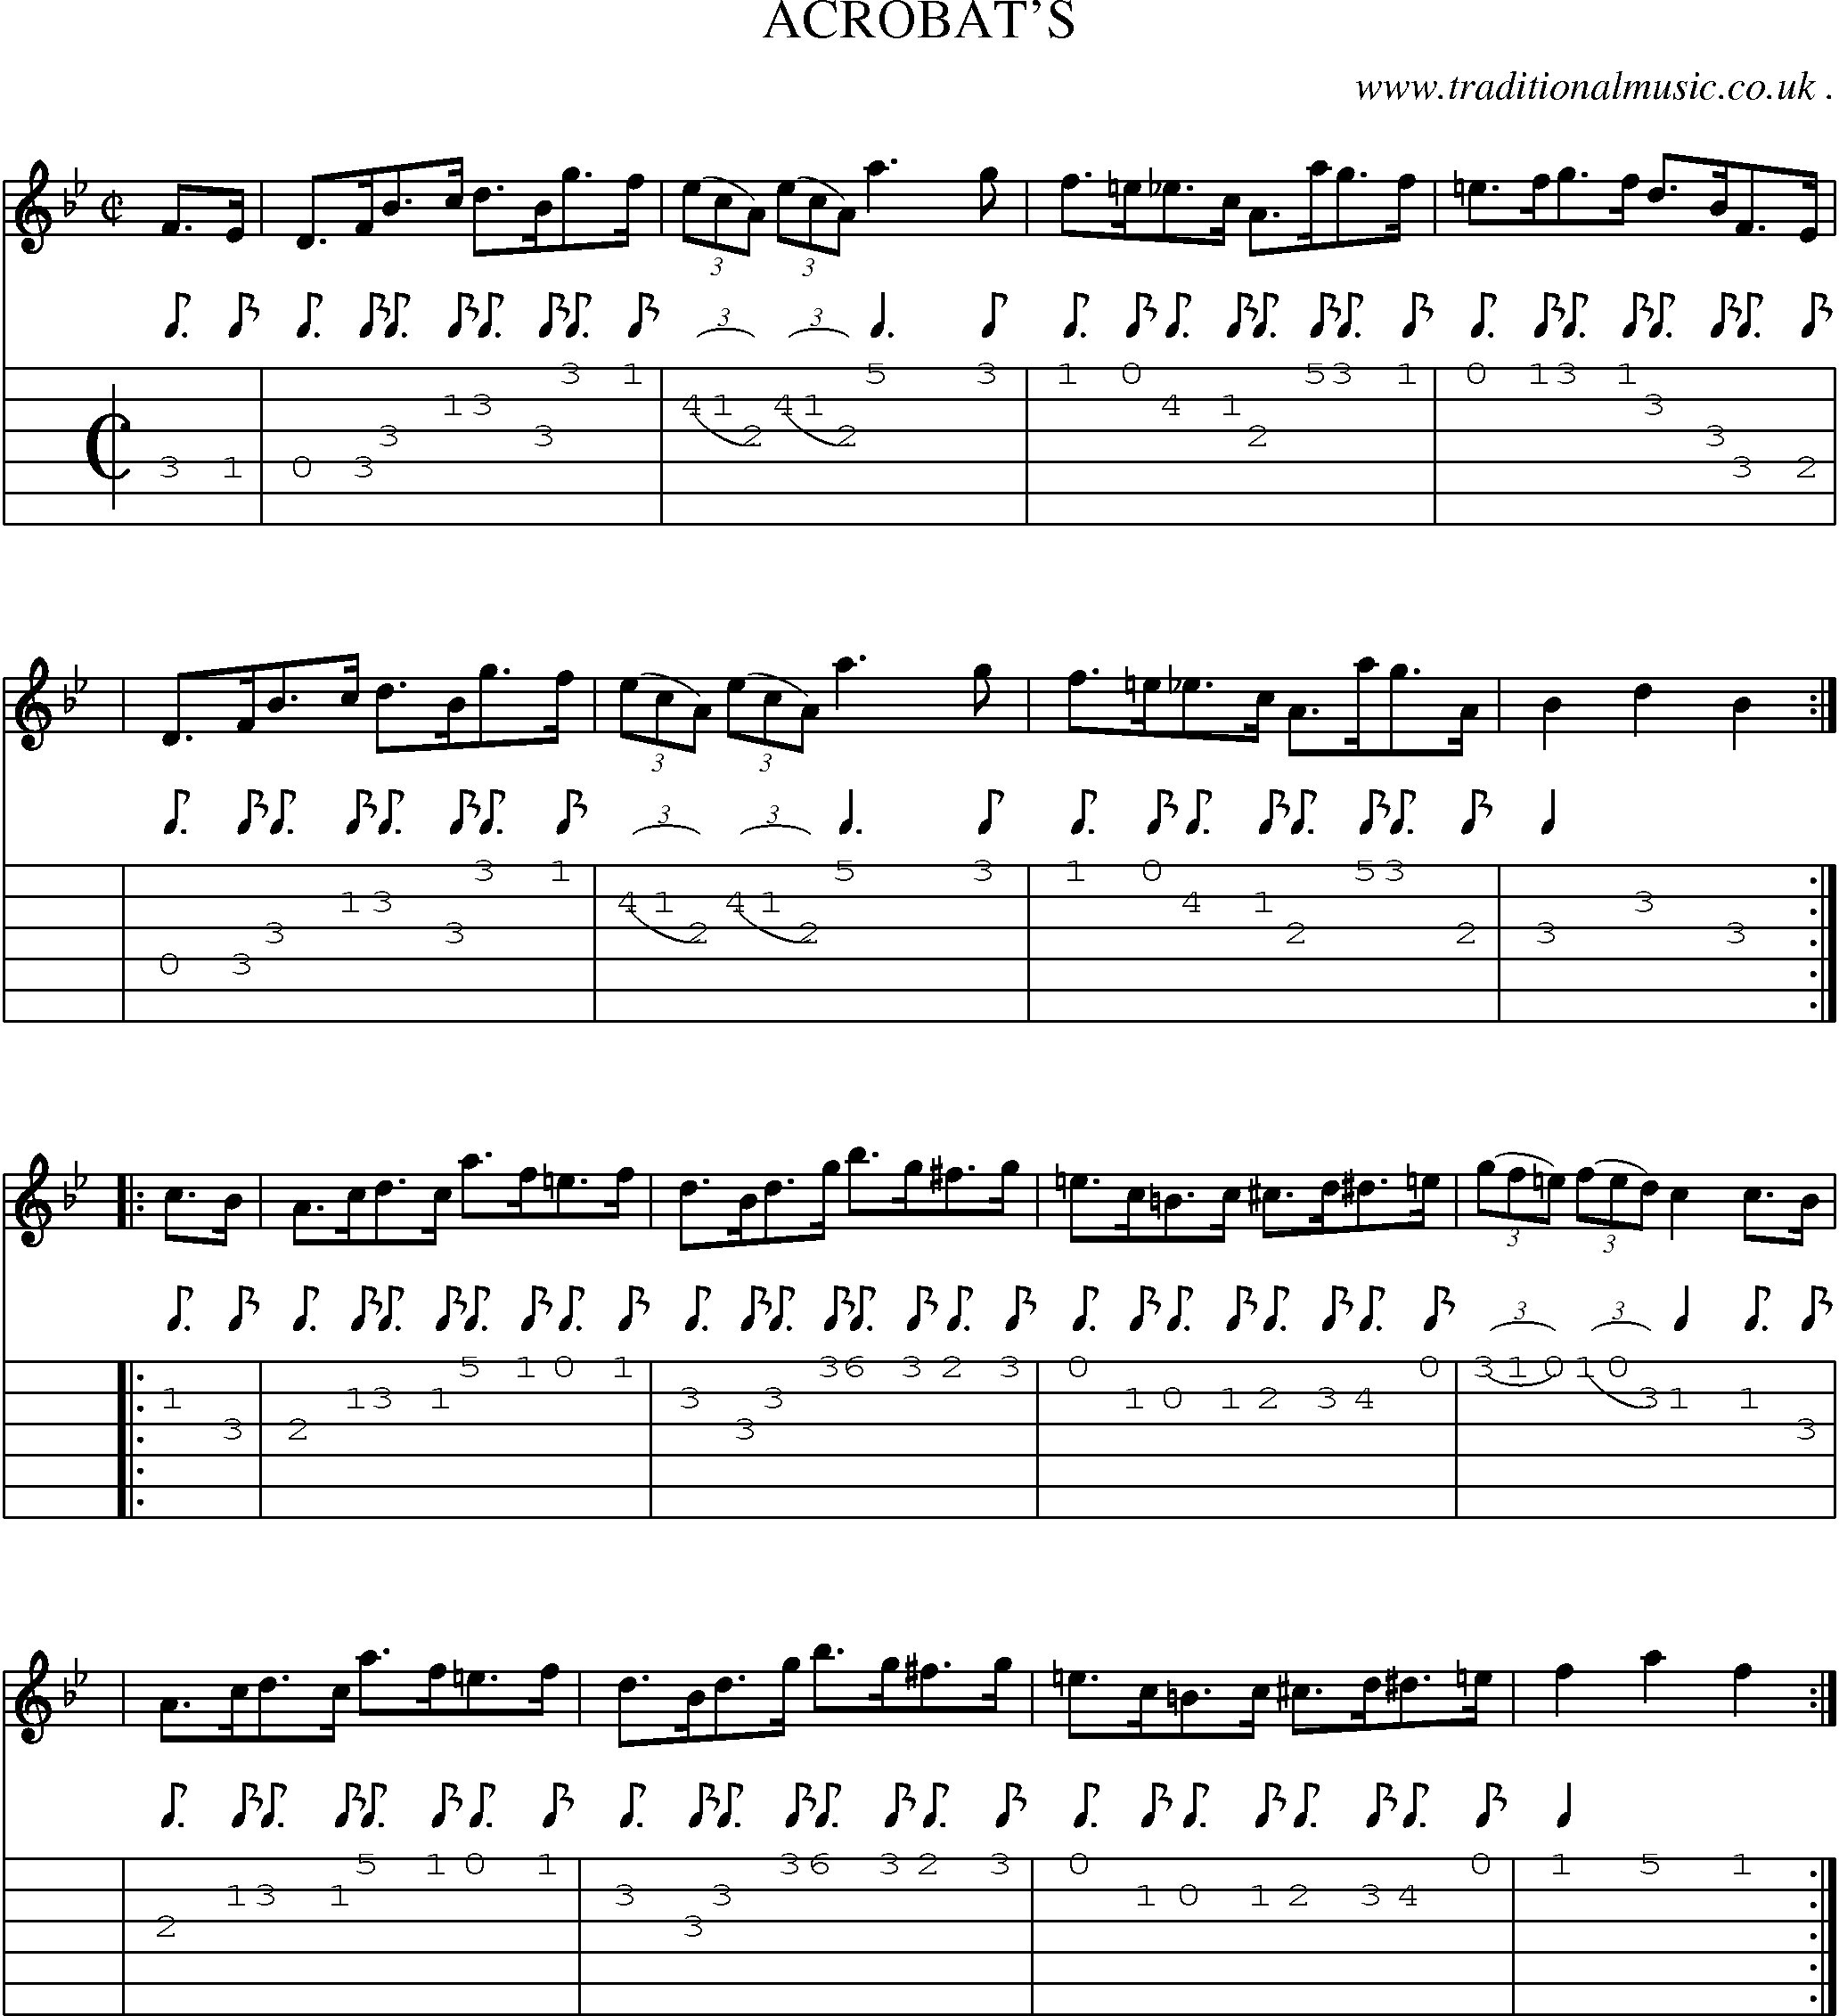 Sheet-Music and Guitar Tabs for Acrobats